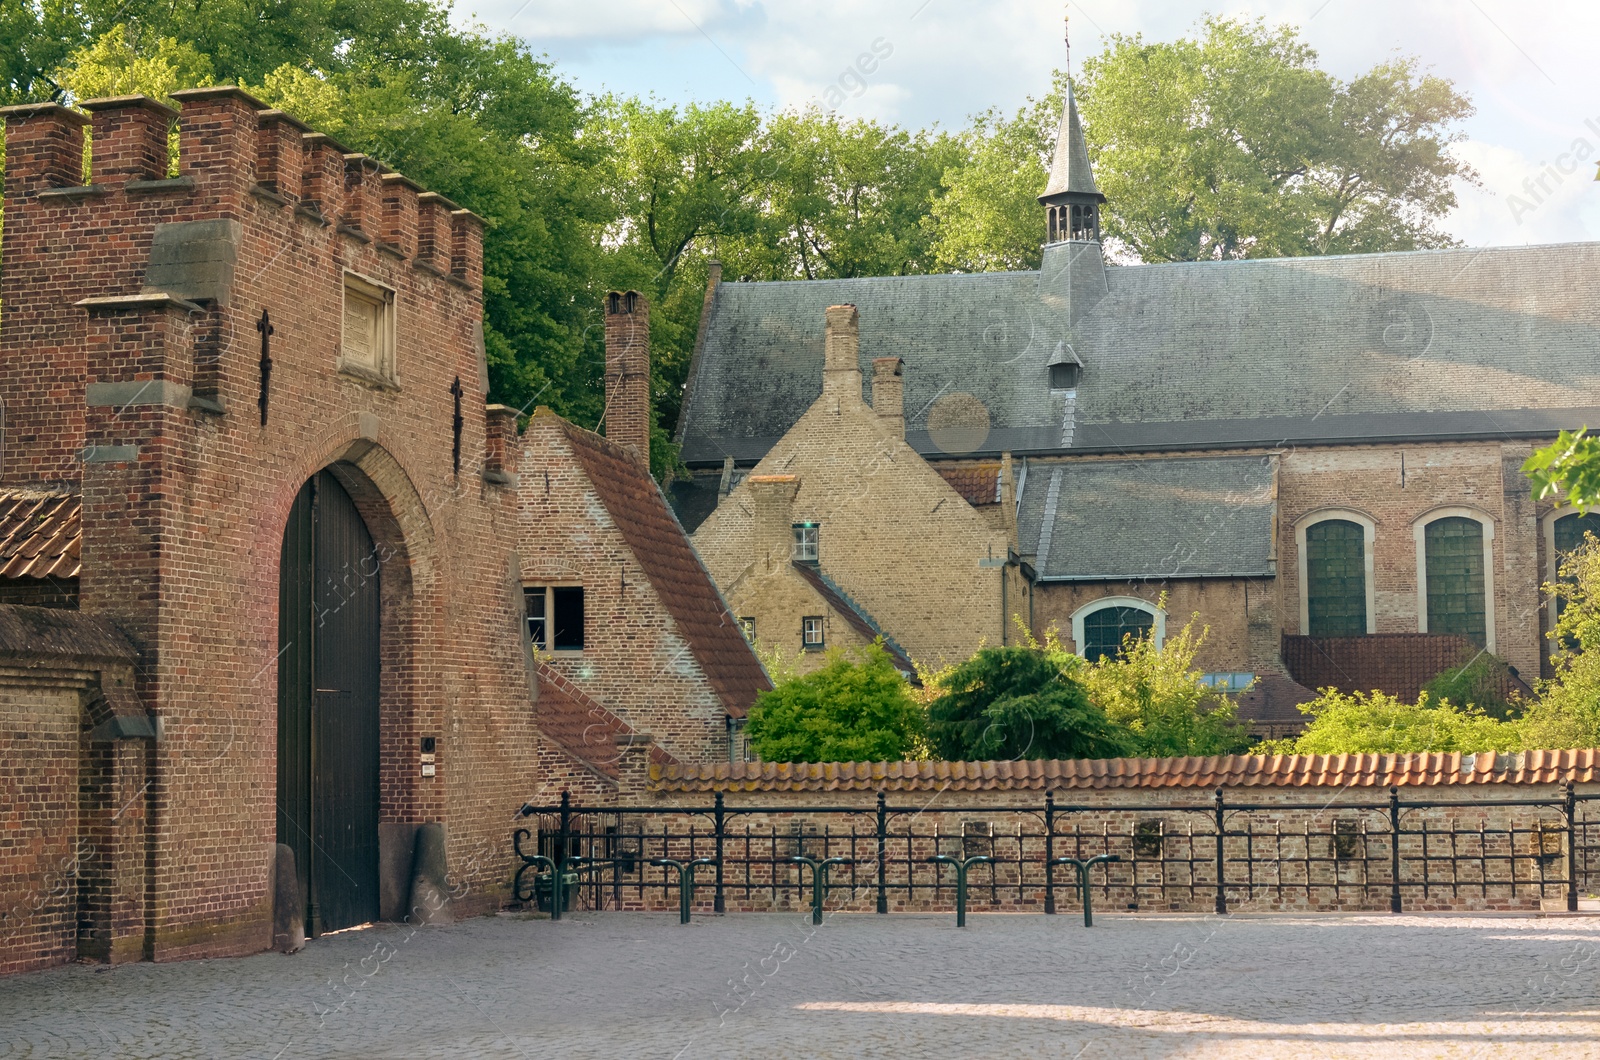 Photo of BRUGES, BELGIUM - JUNE 14, 2019: Beautiful view of entrance gate and the Princely Beguinage Ten Wijngaerde buildings